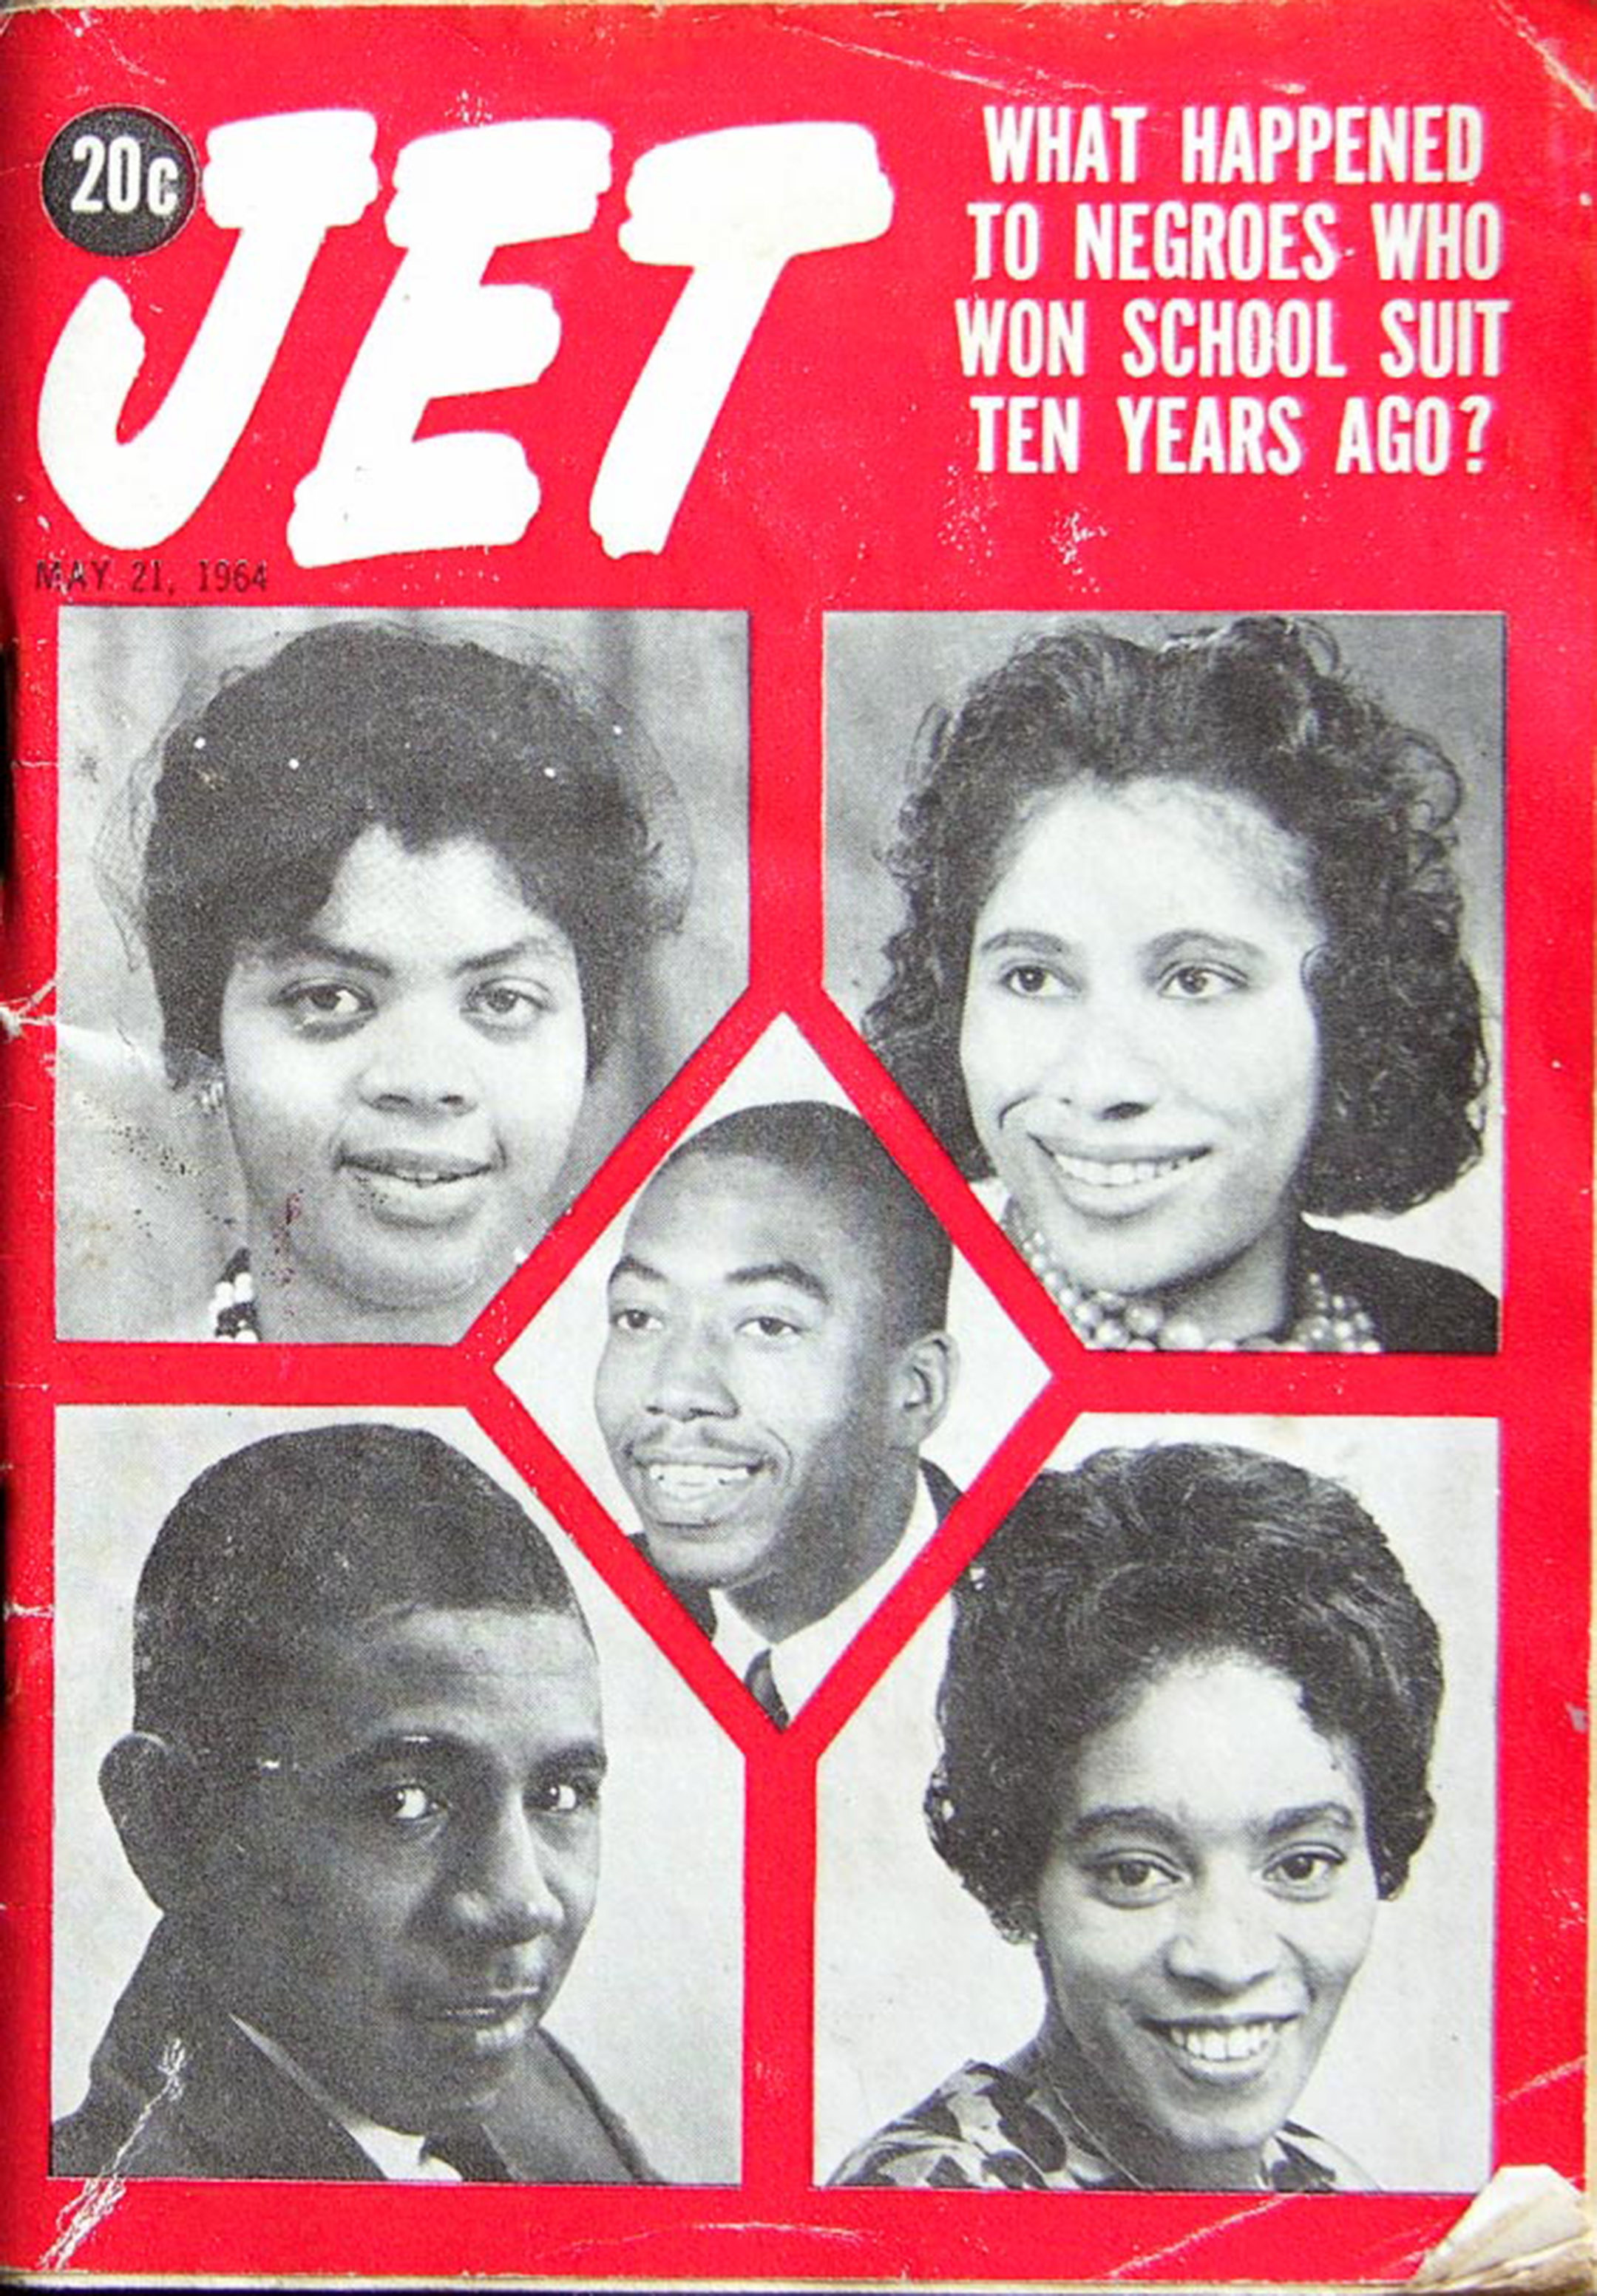 Cover of jet magazine, with headshot photos of five black students set against a red background